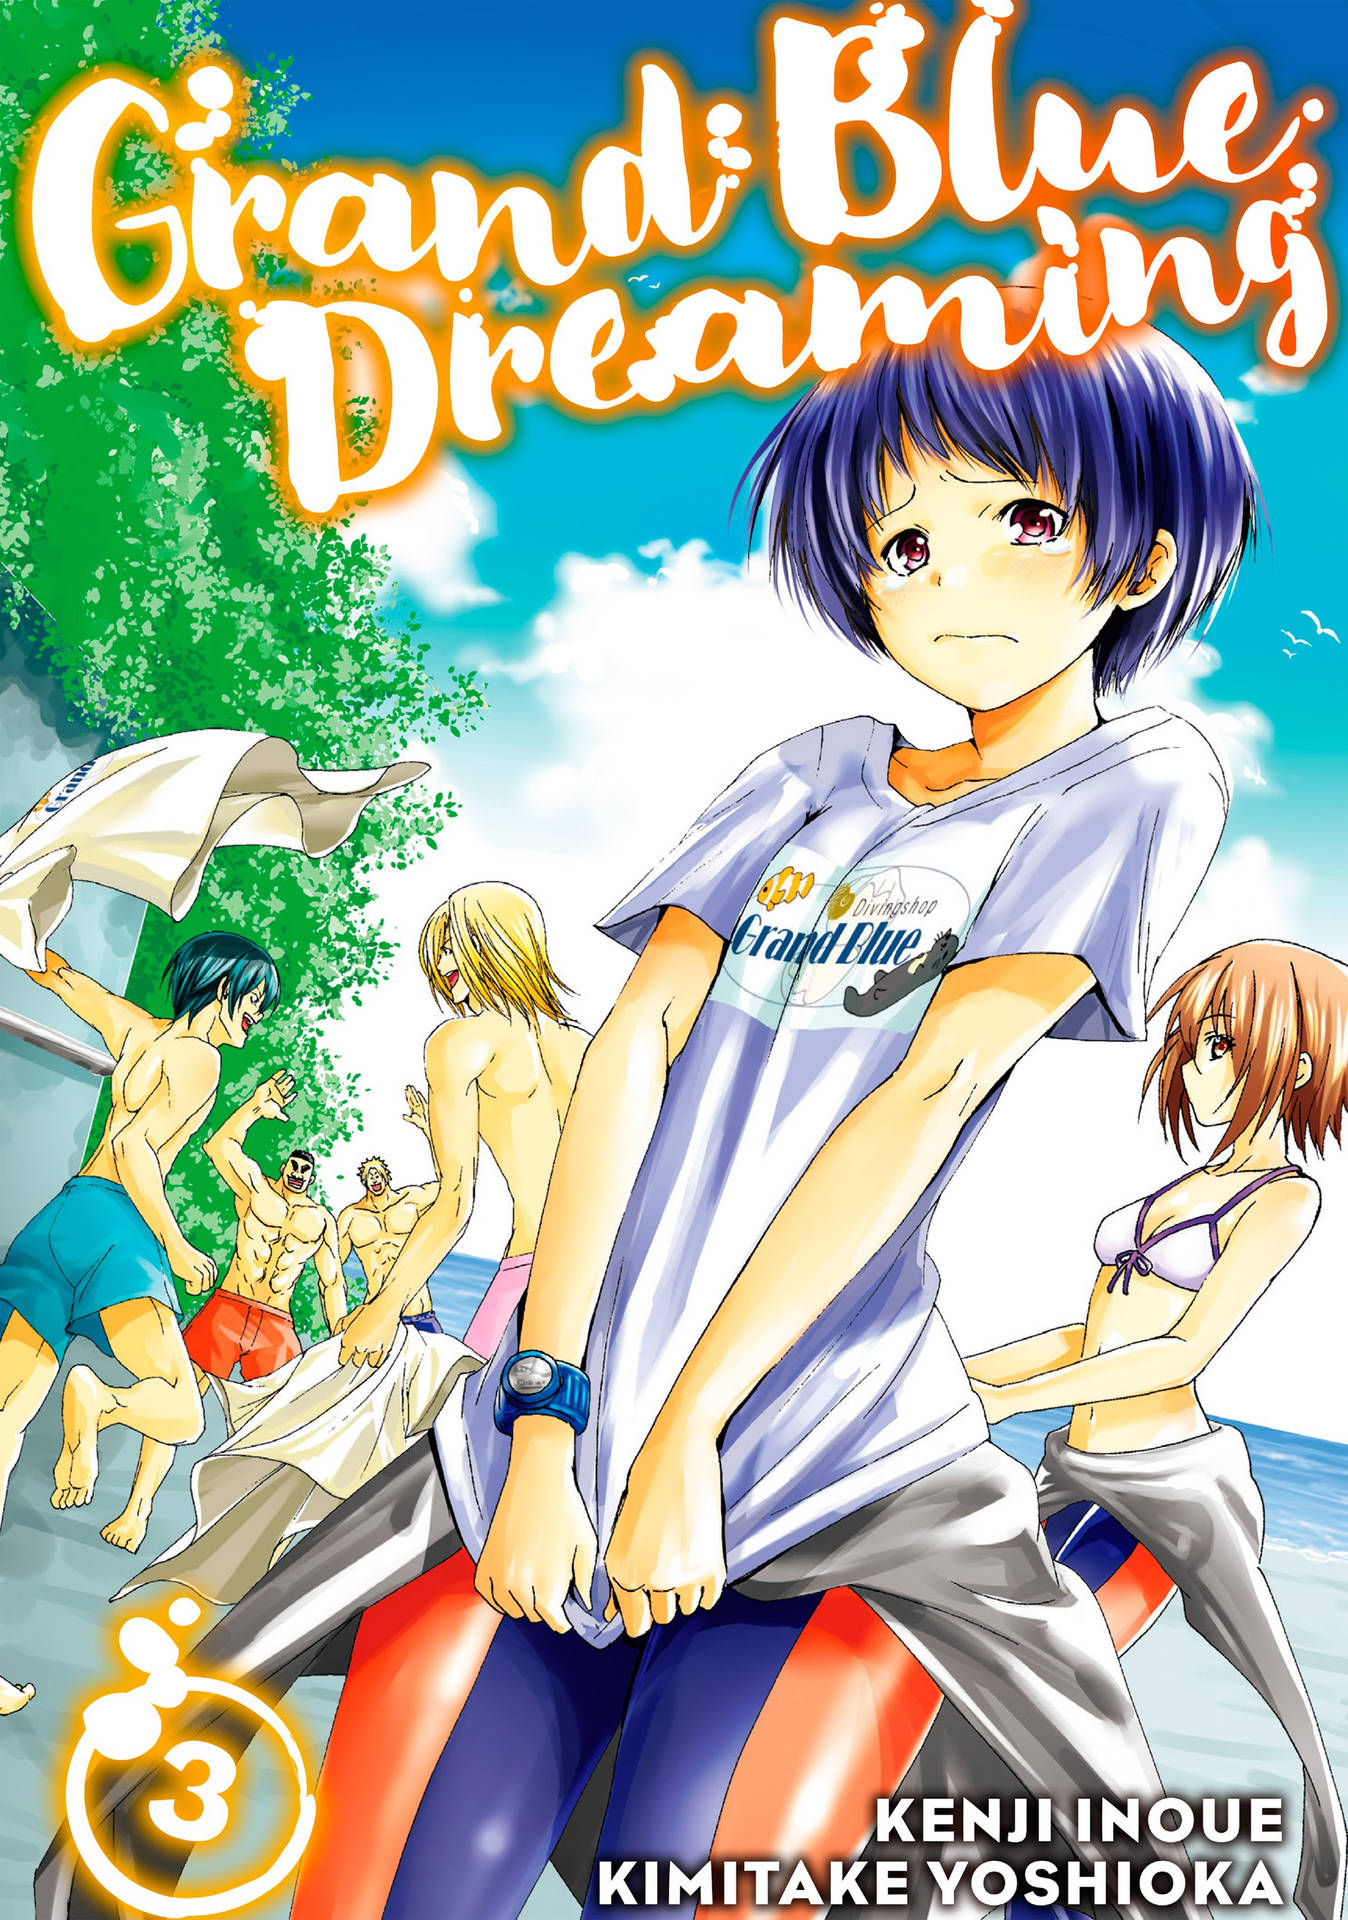 Grand Blue Dreaming Background